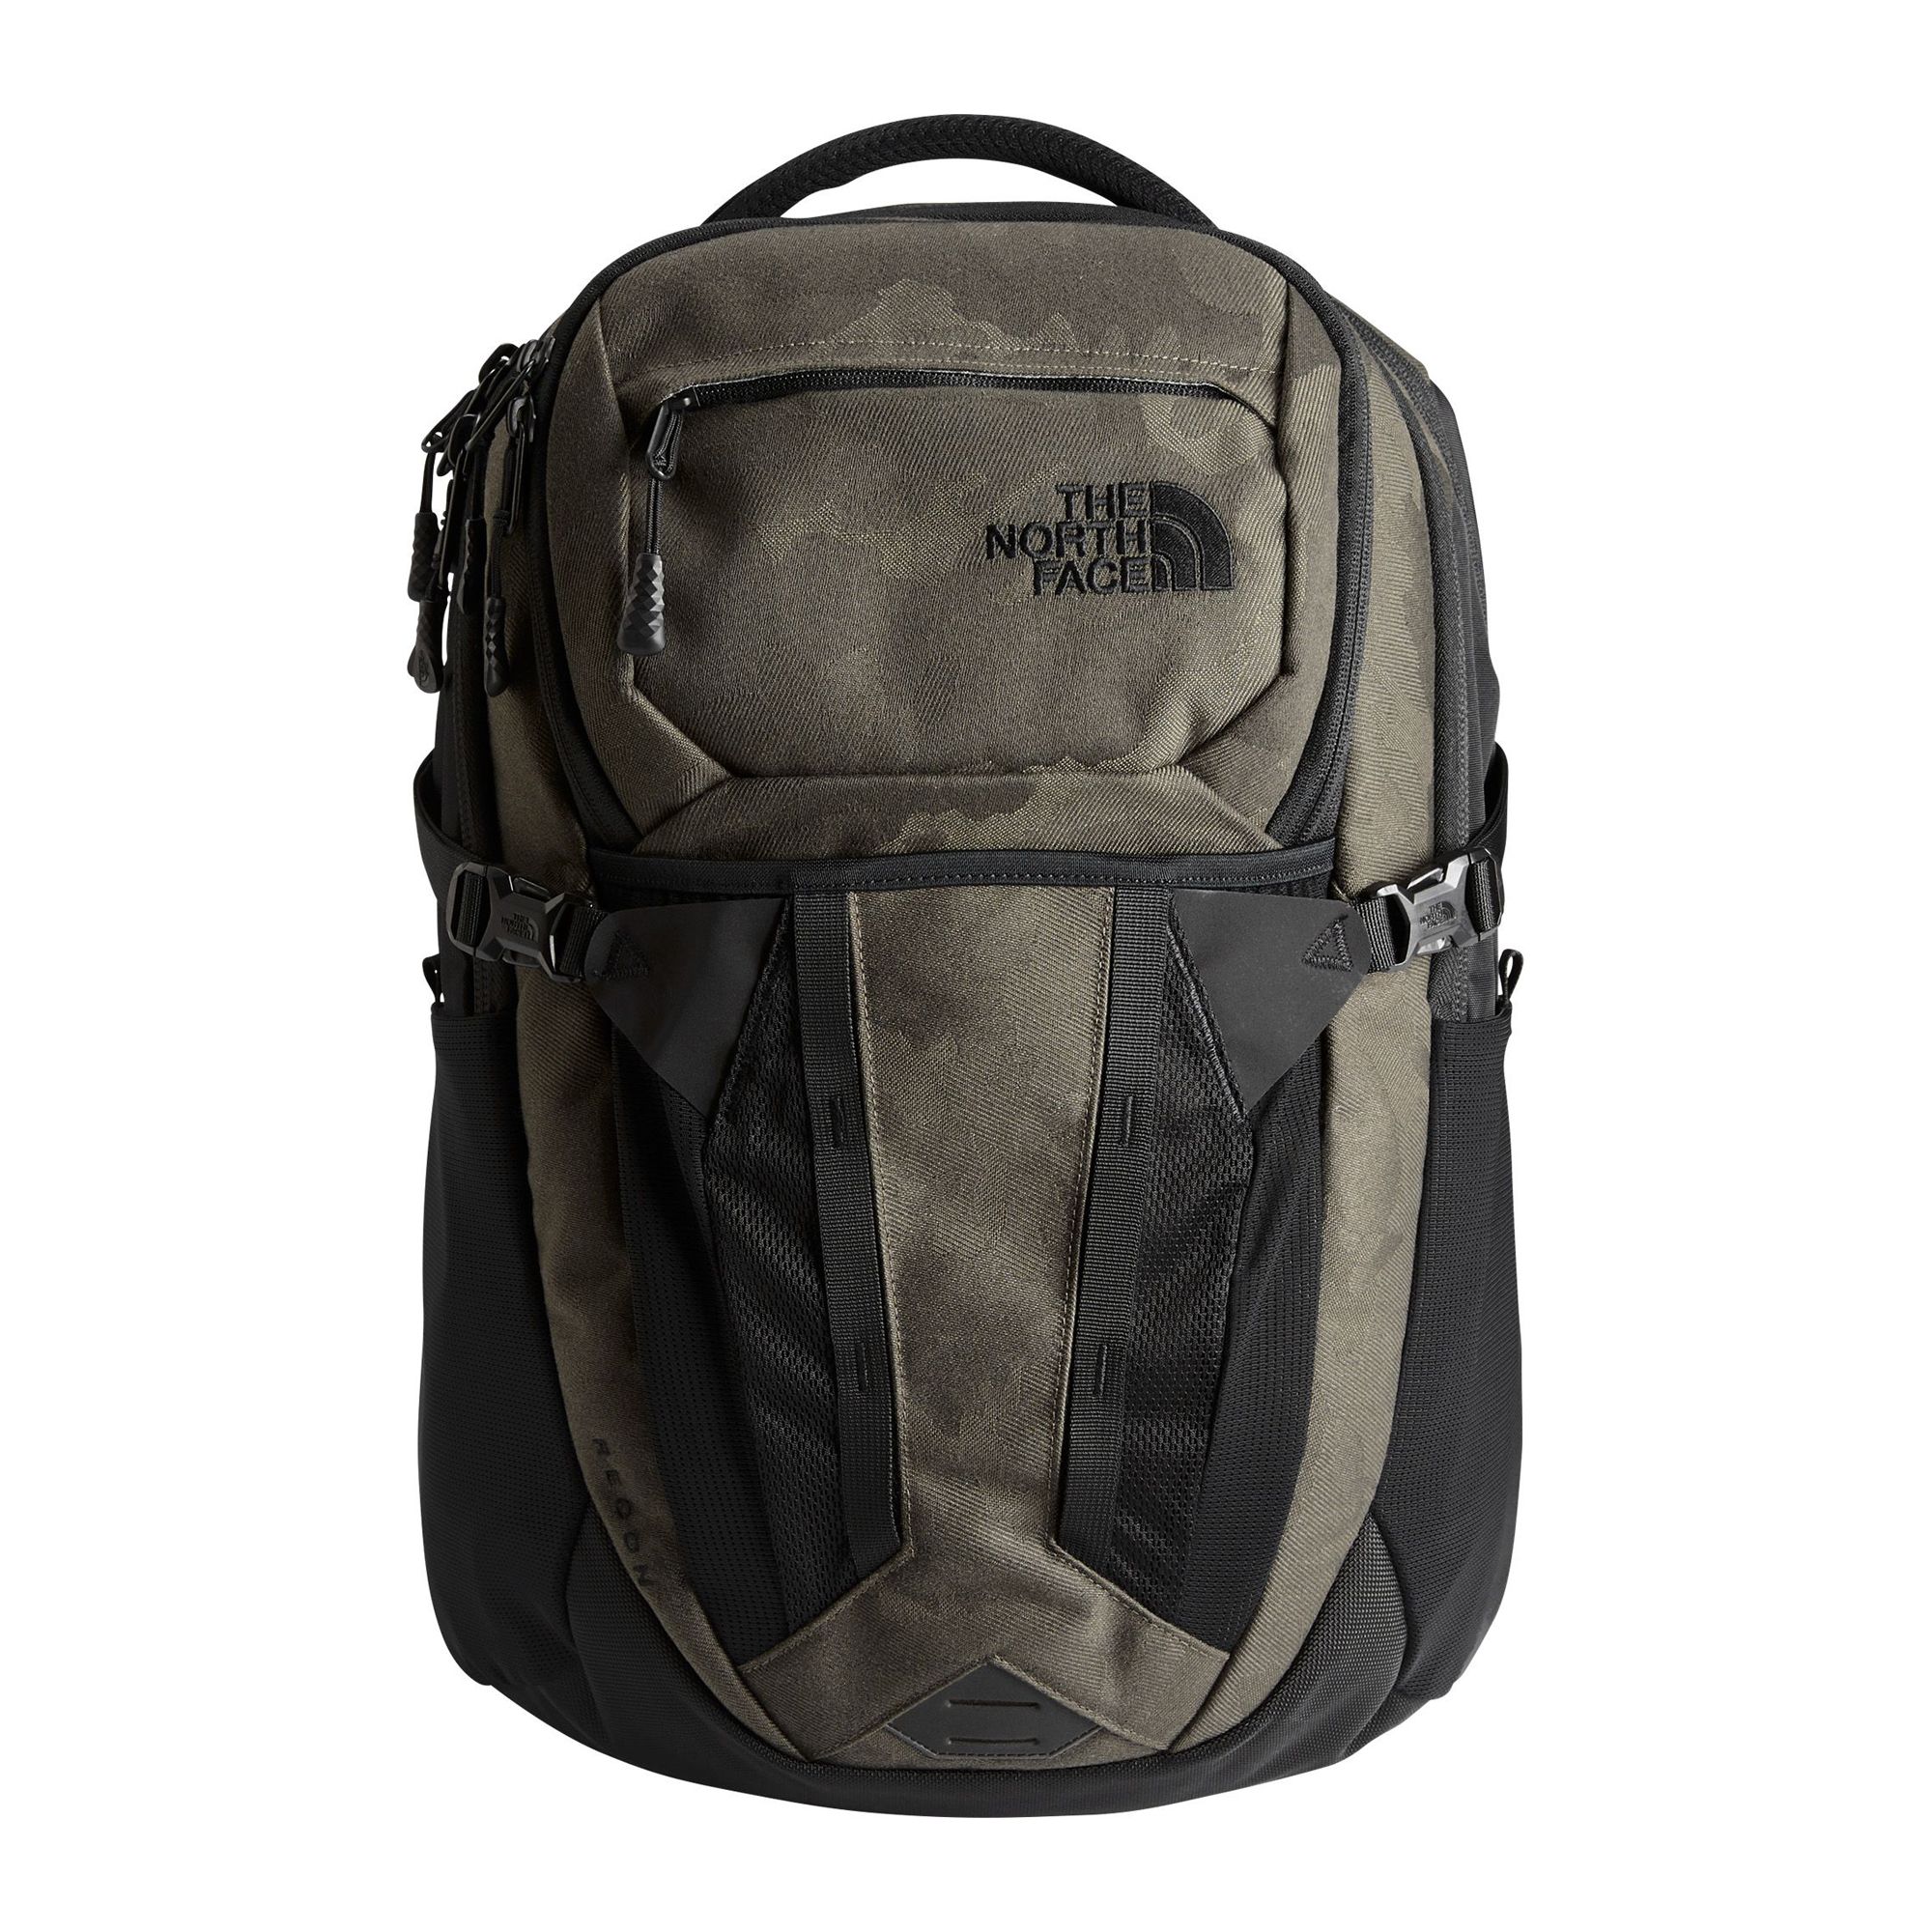 The North Face Recon Backpack New Taupe Green Camo Jacquard Online Sneaker Store Sole Station